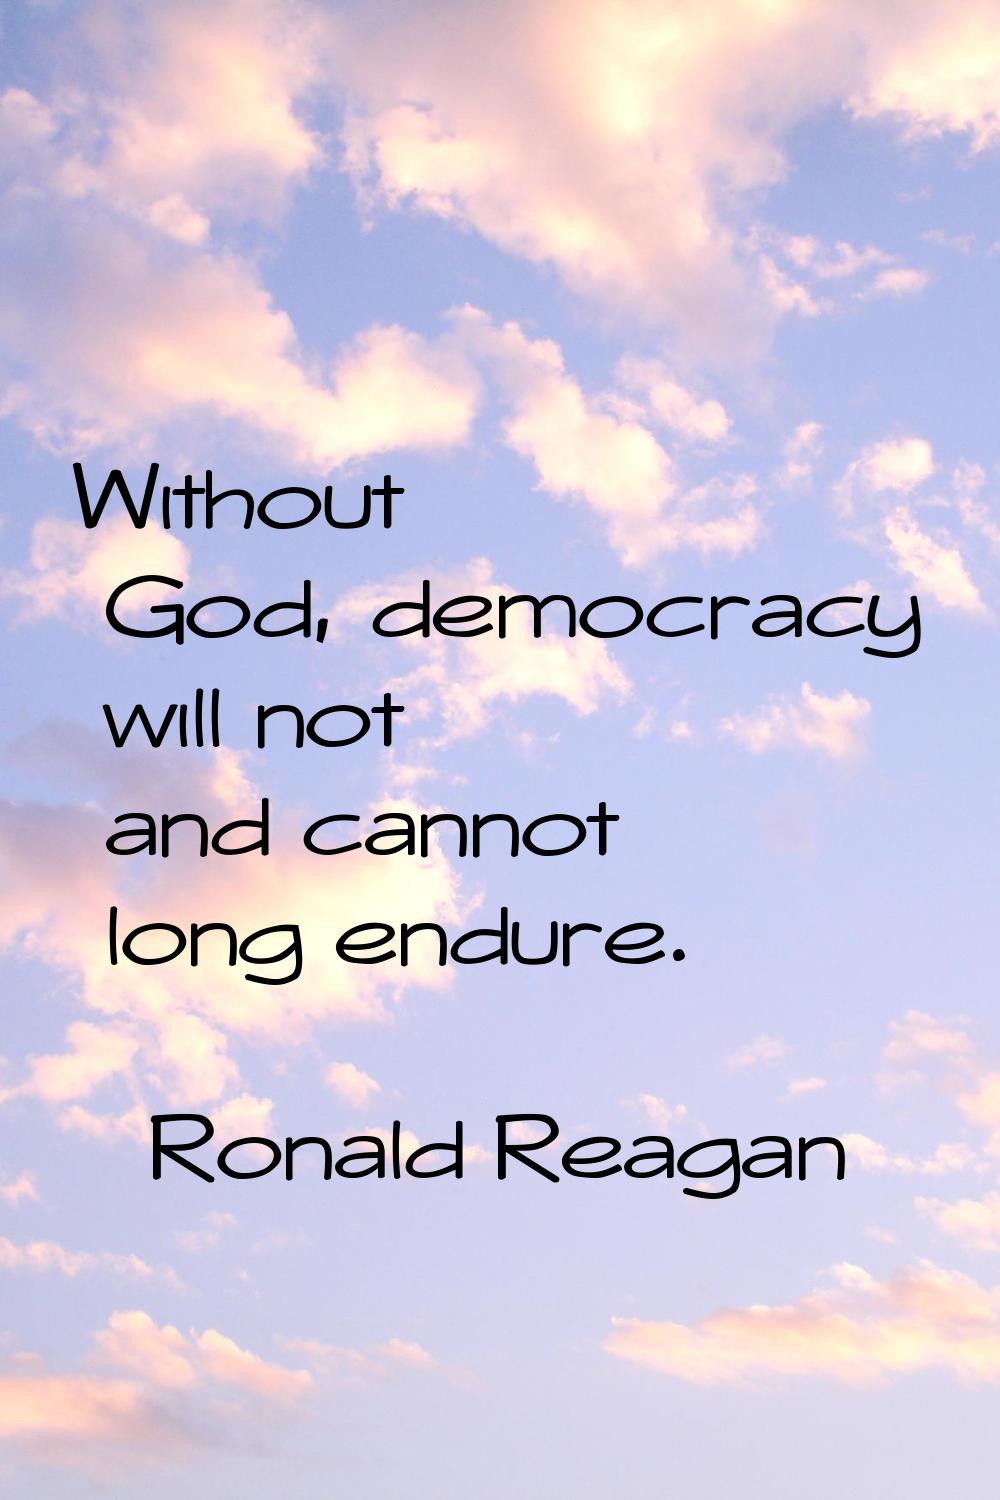 Without God, democracy will not and cannot long endure.